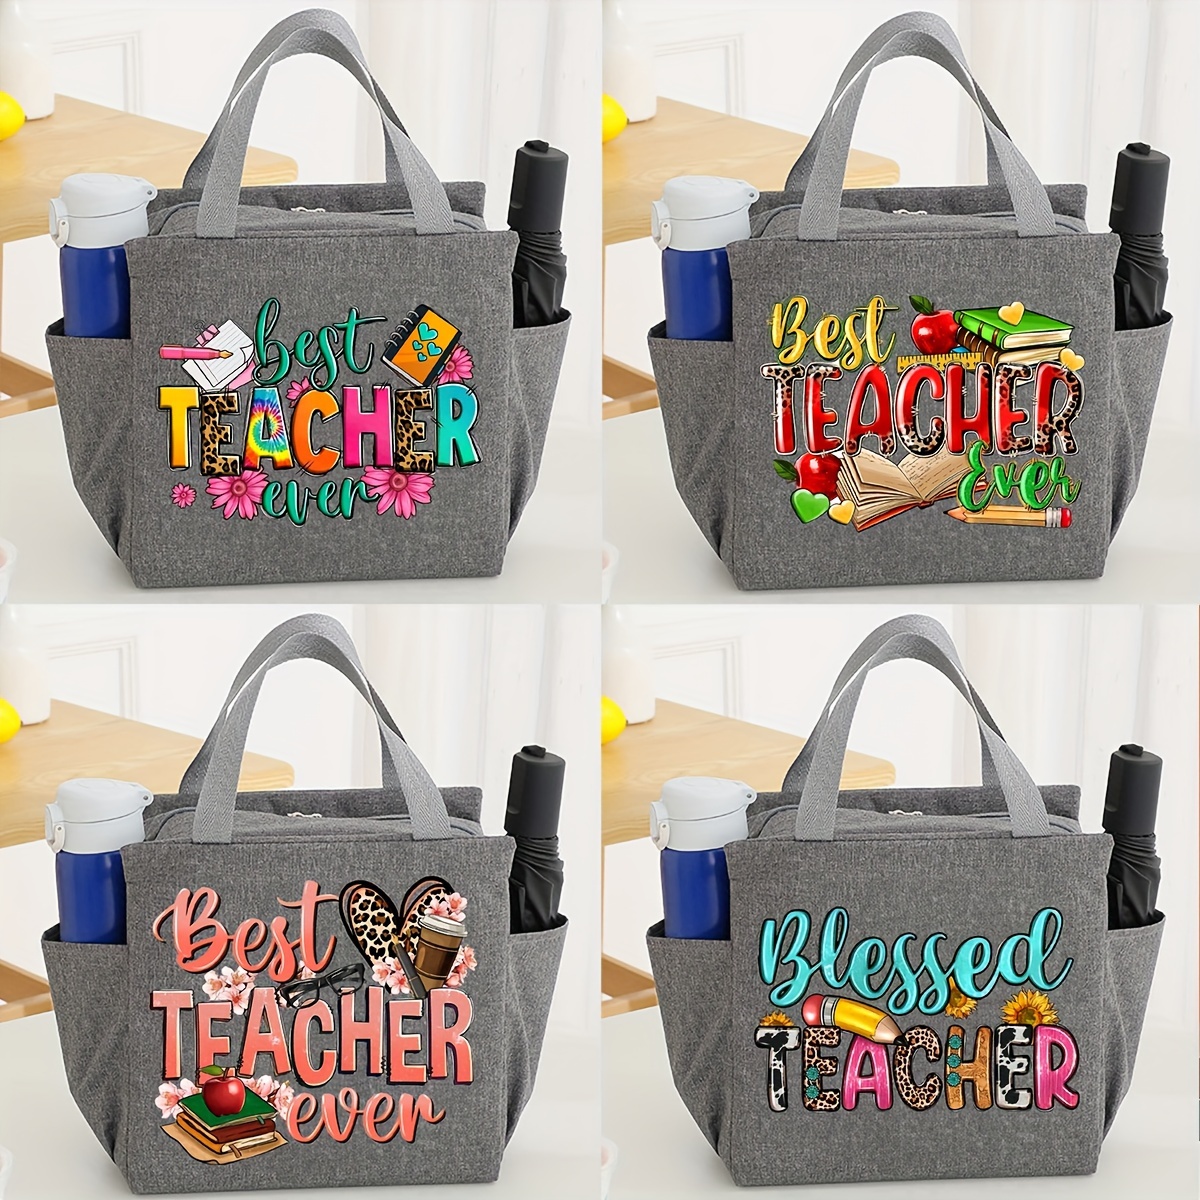 

Teacher Appreciation Canvas Lunch Tote, Insulated Portable Cooler Bag With Foil Lining For Office And School, "best Teacher Ever" & "blessed Teacher" Designs Bag For Teacher Day Gift